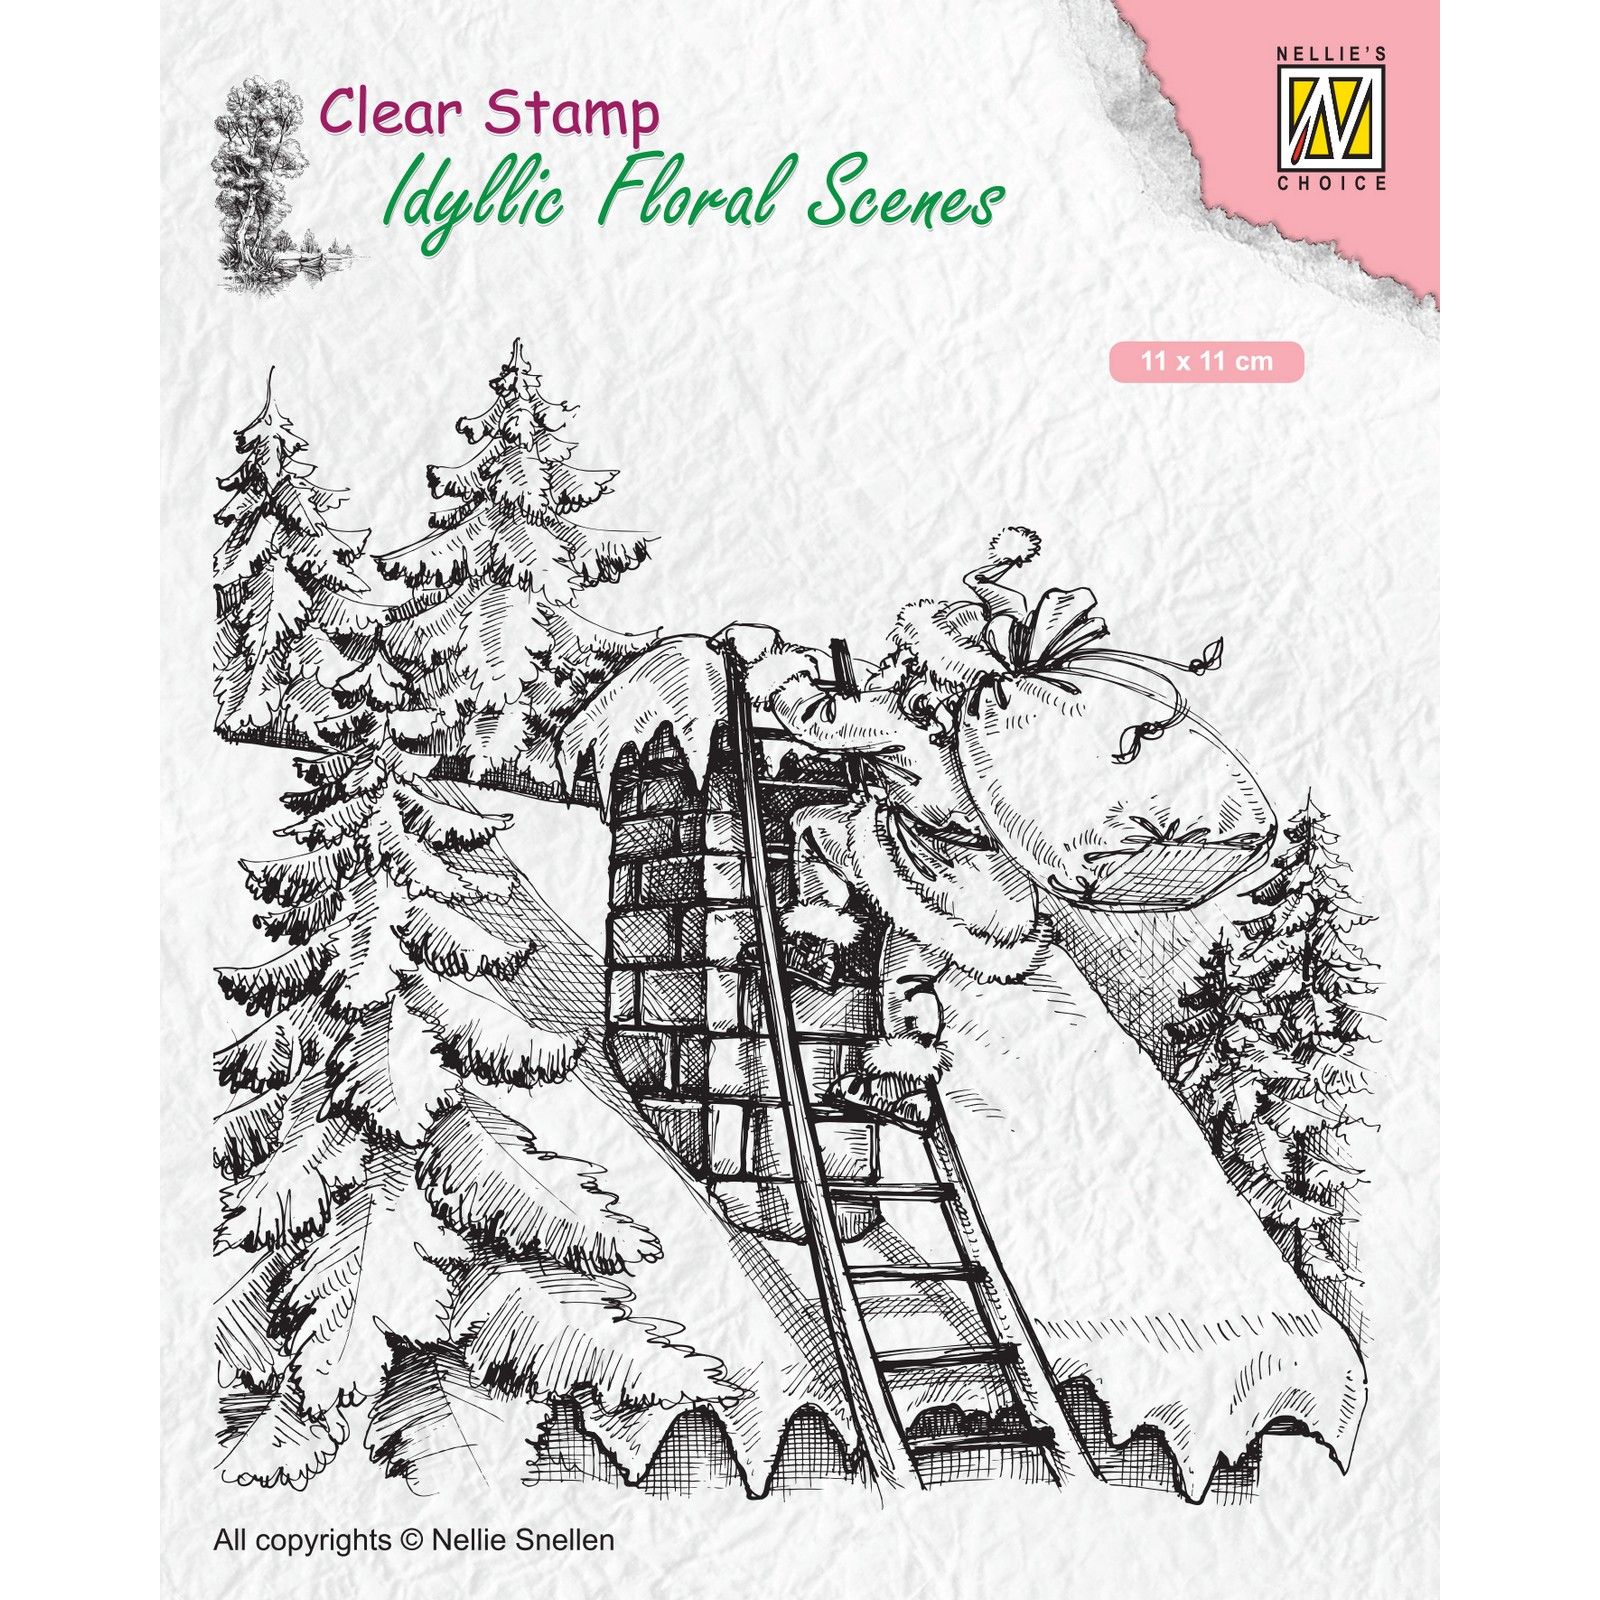 Nellie's Choice • Idyllic Floral Scenes Clear Stamps Santa Claus At Work 95x107mm